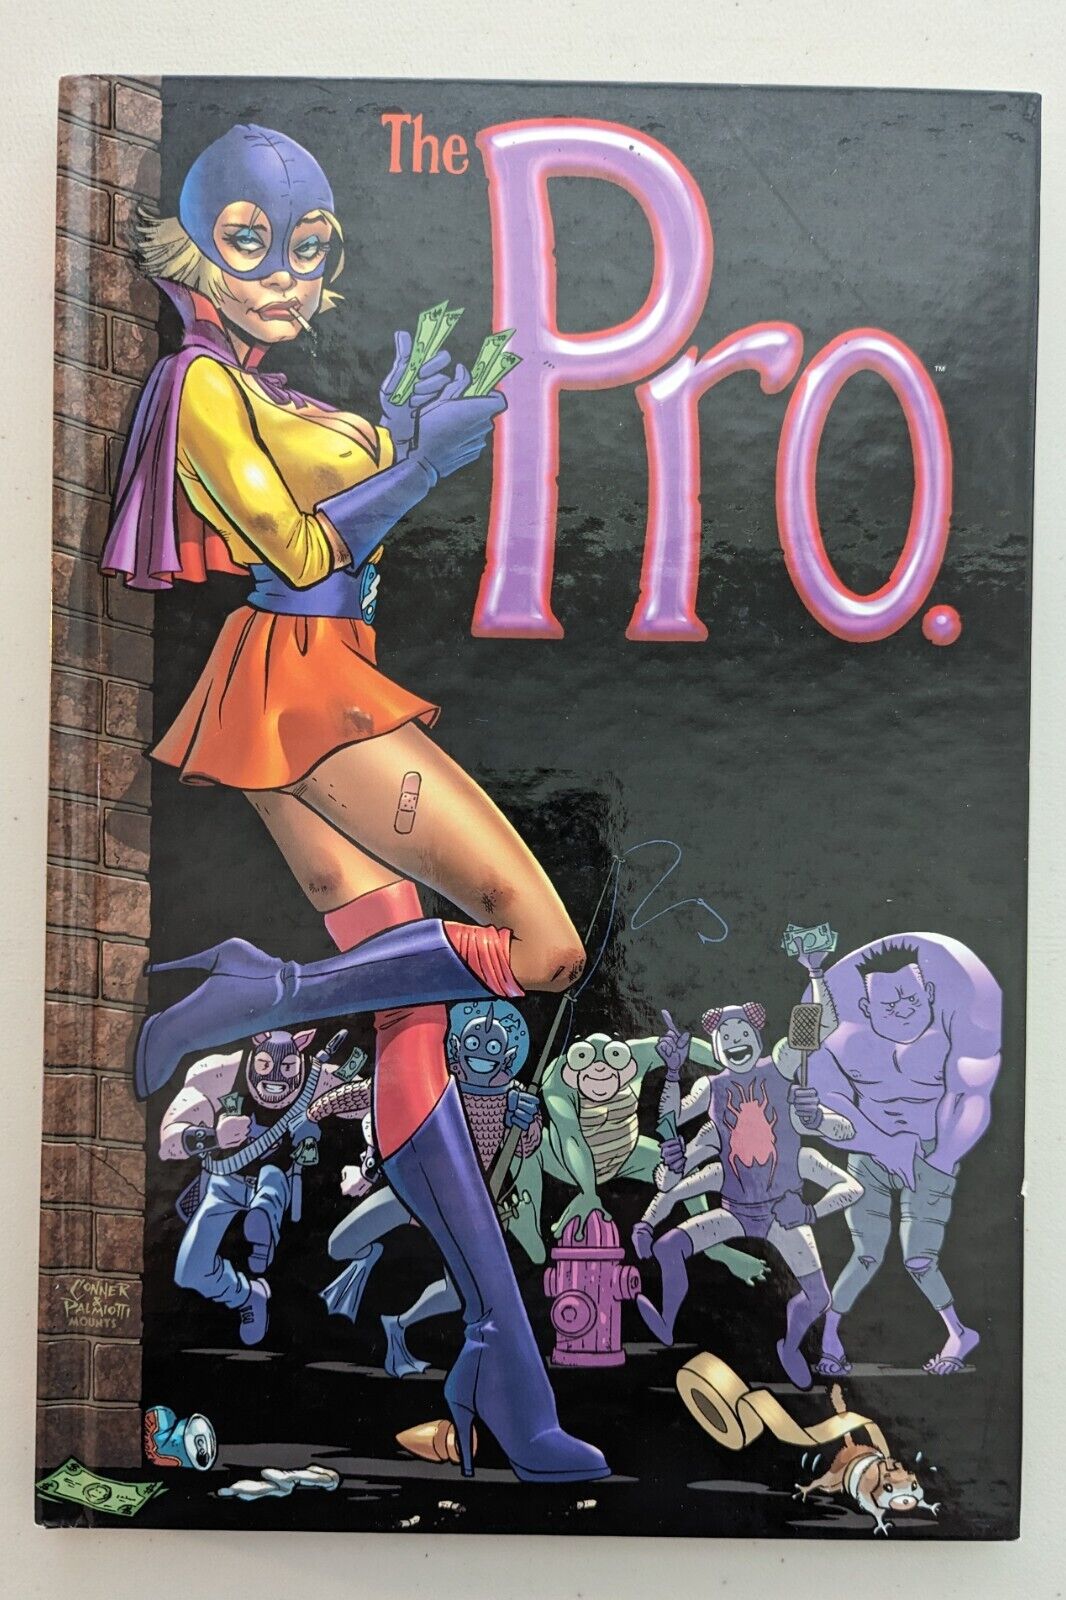 THE PRO Garth Ennis Rare OOP 2004 1st ed Hardcover Deluxe Edition Image Comics